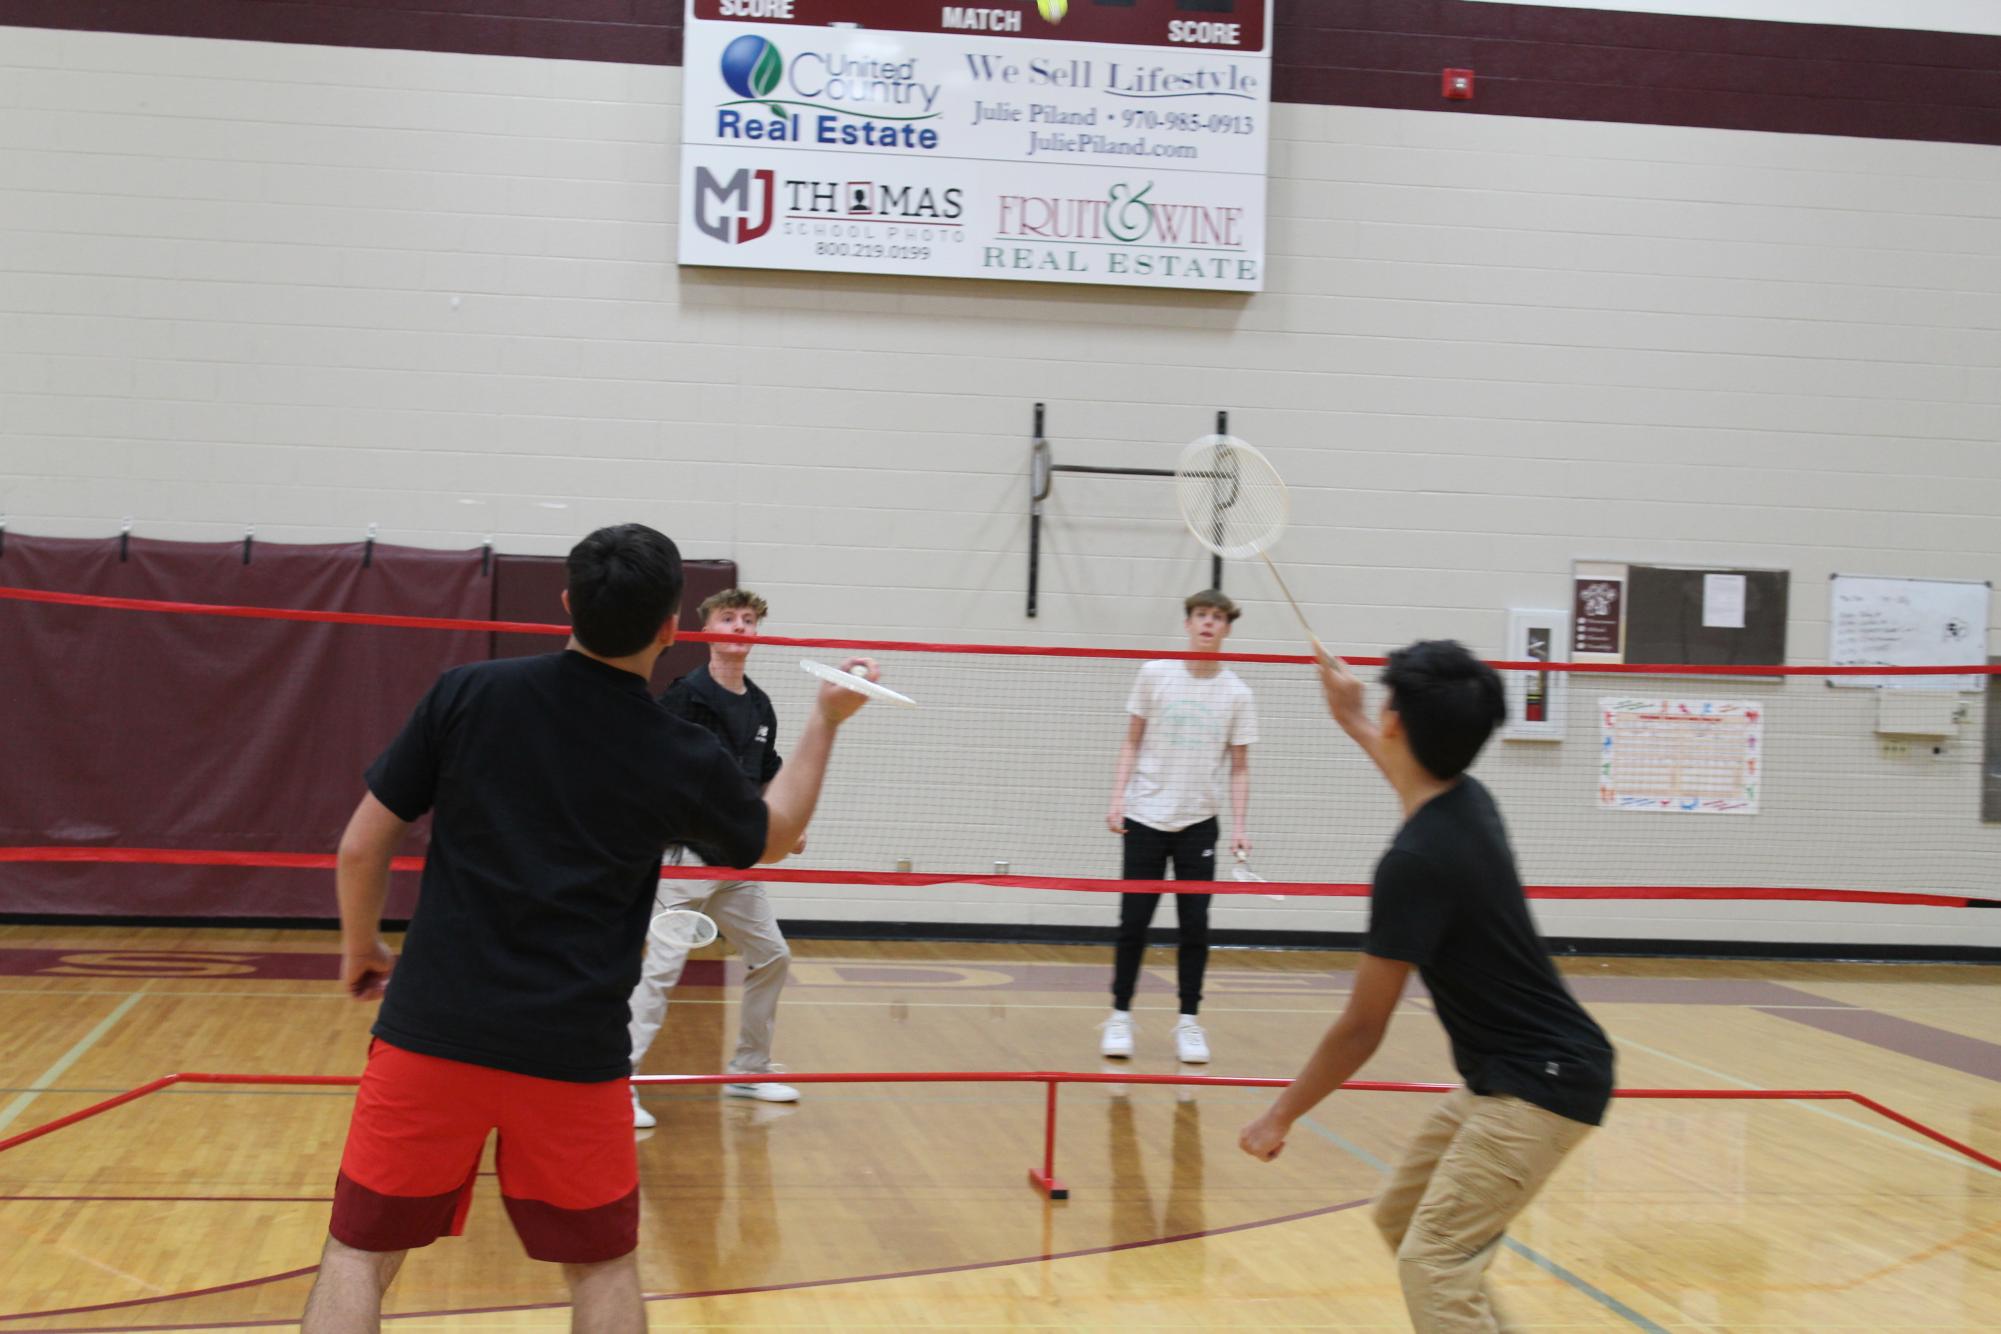 Participants competing in badminton games
